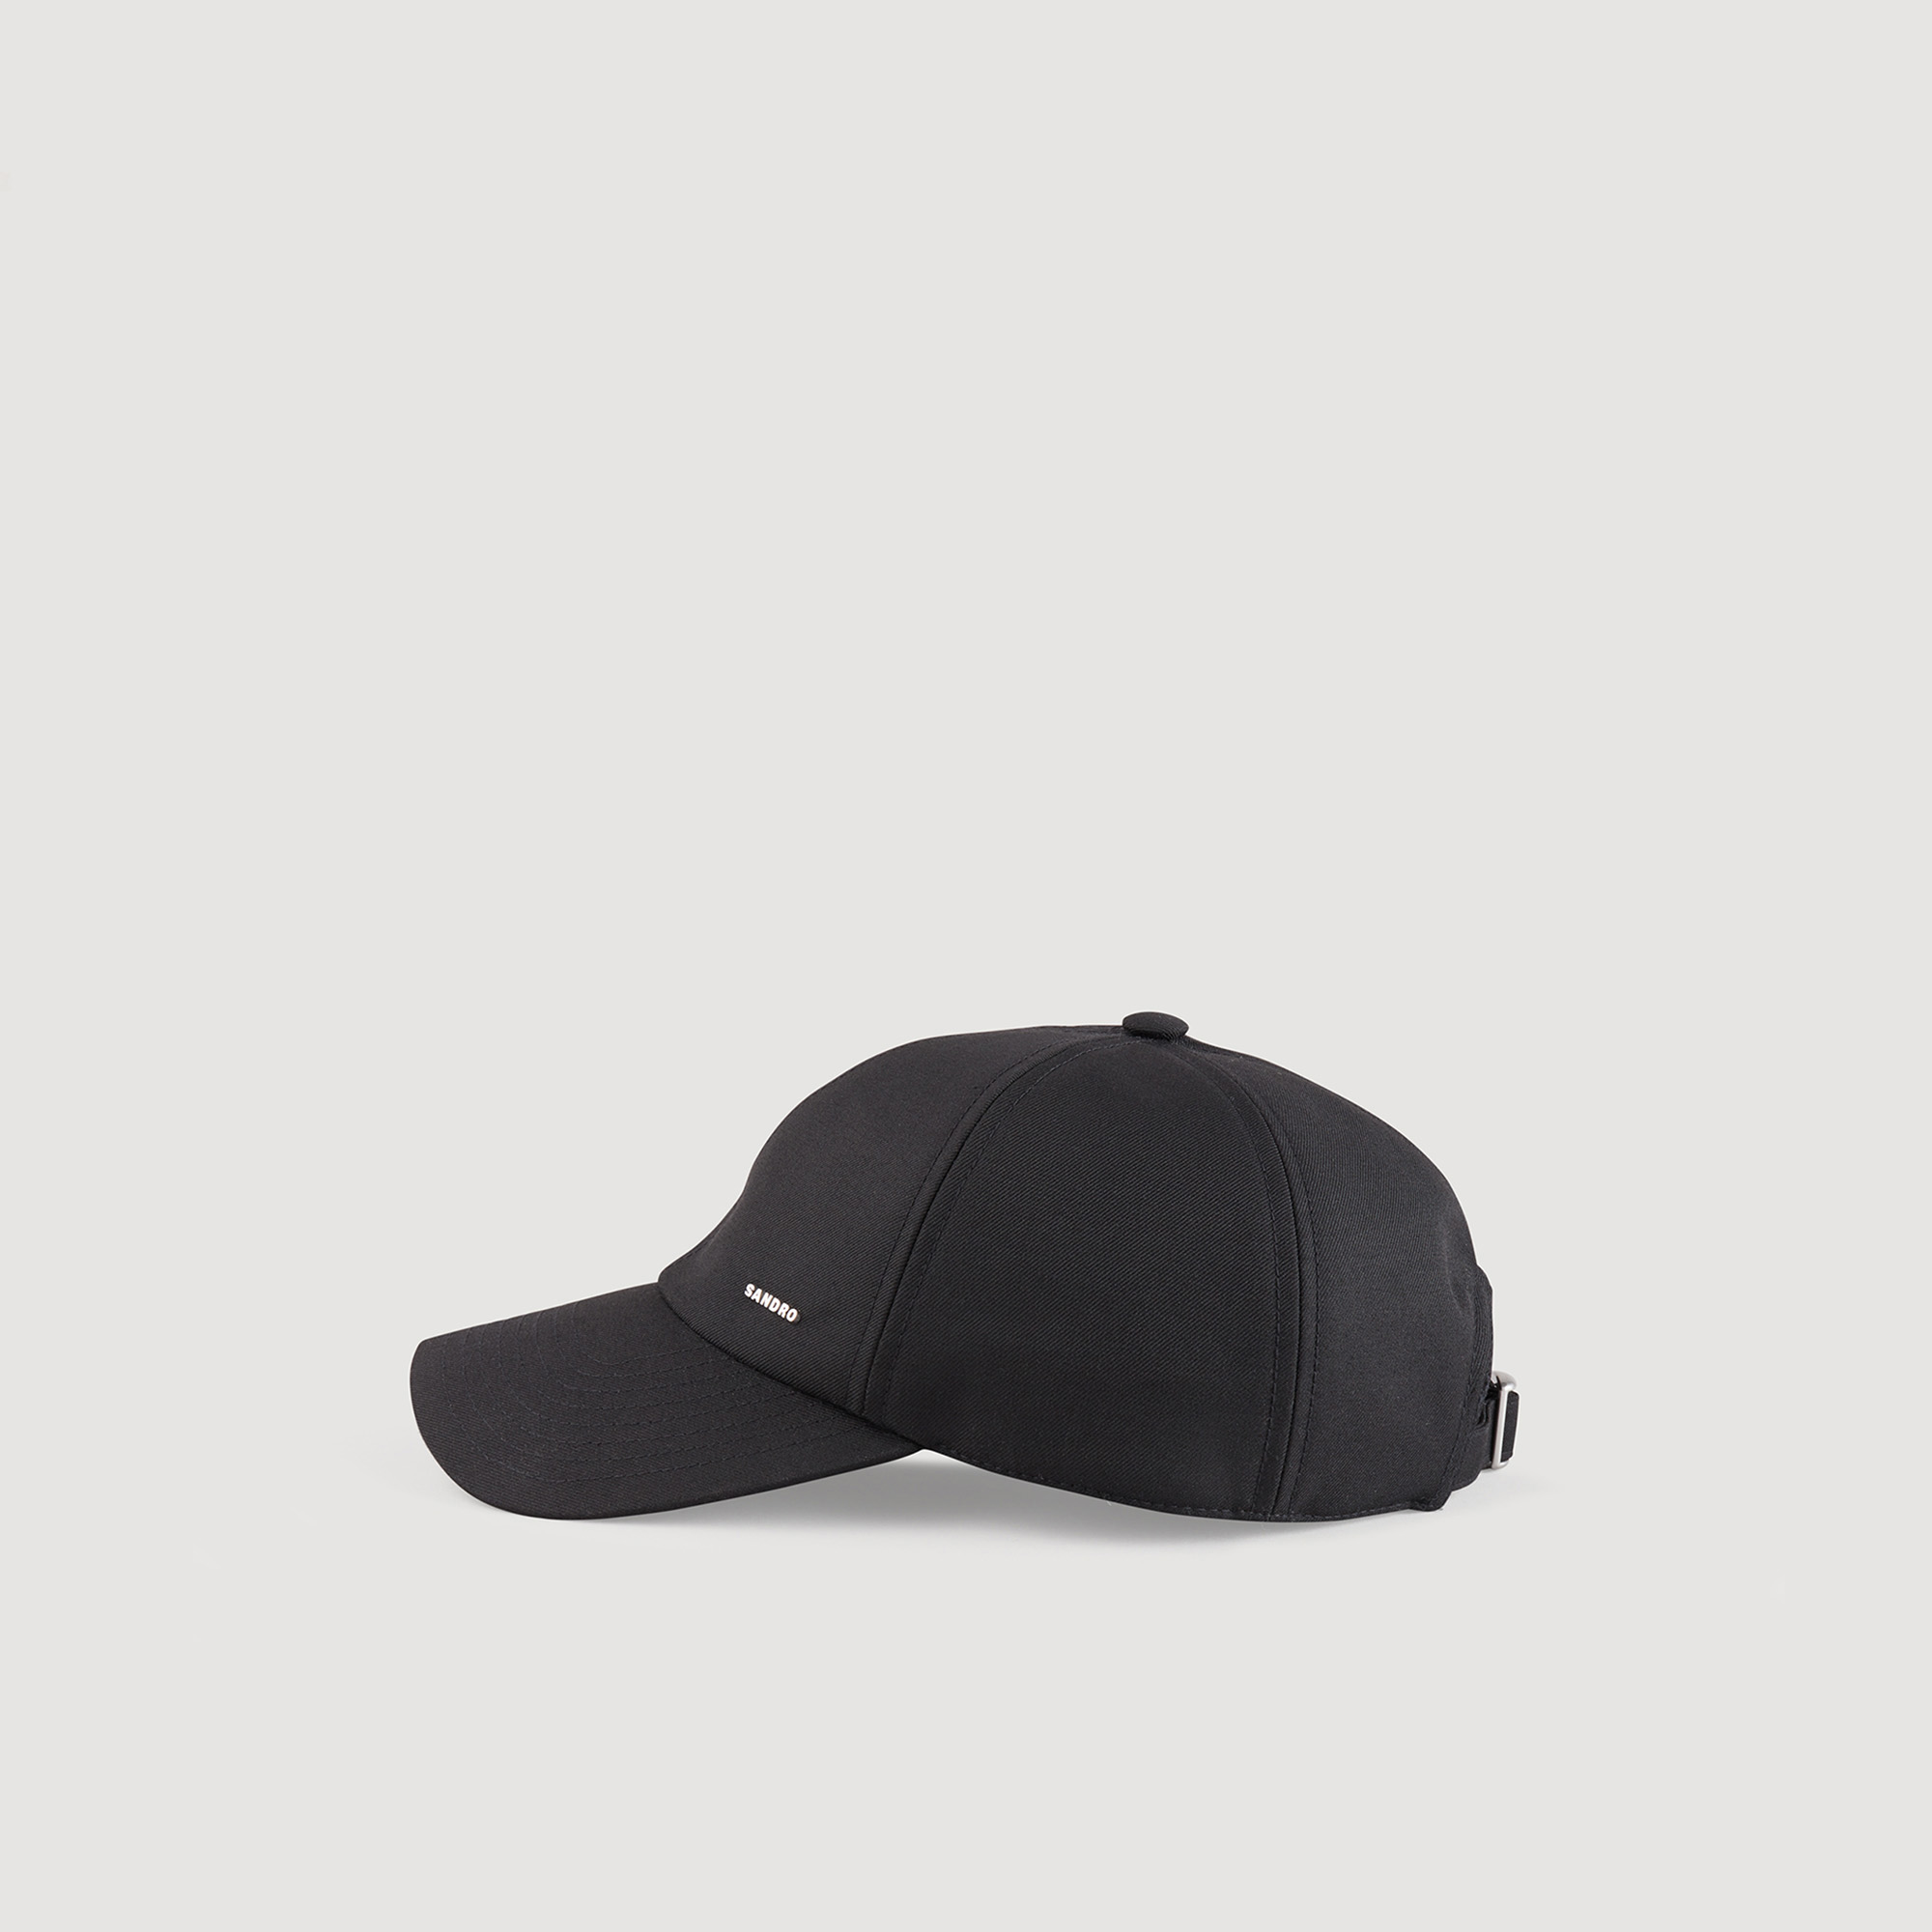 Sandro polyester Cap in water-repellent technical fabric, embellished with a metallic Sandro rivet on the side and featuring an adjustable strap on the back